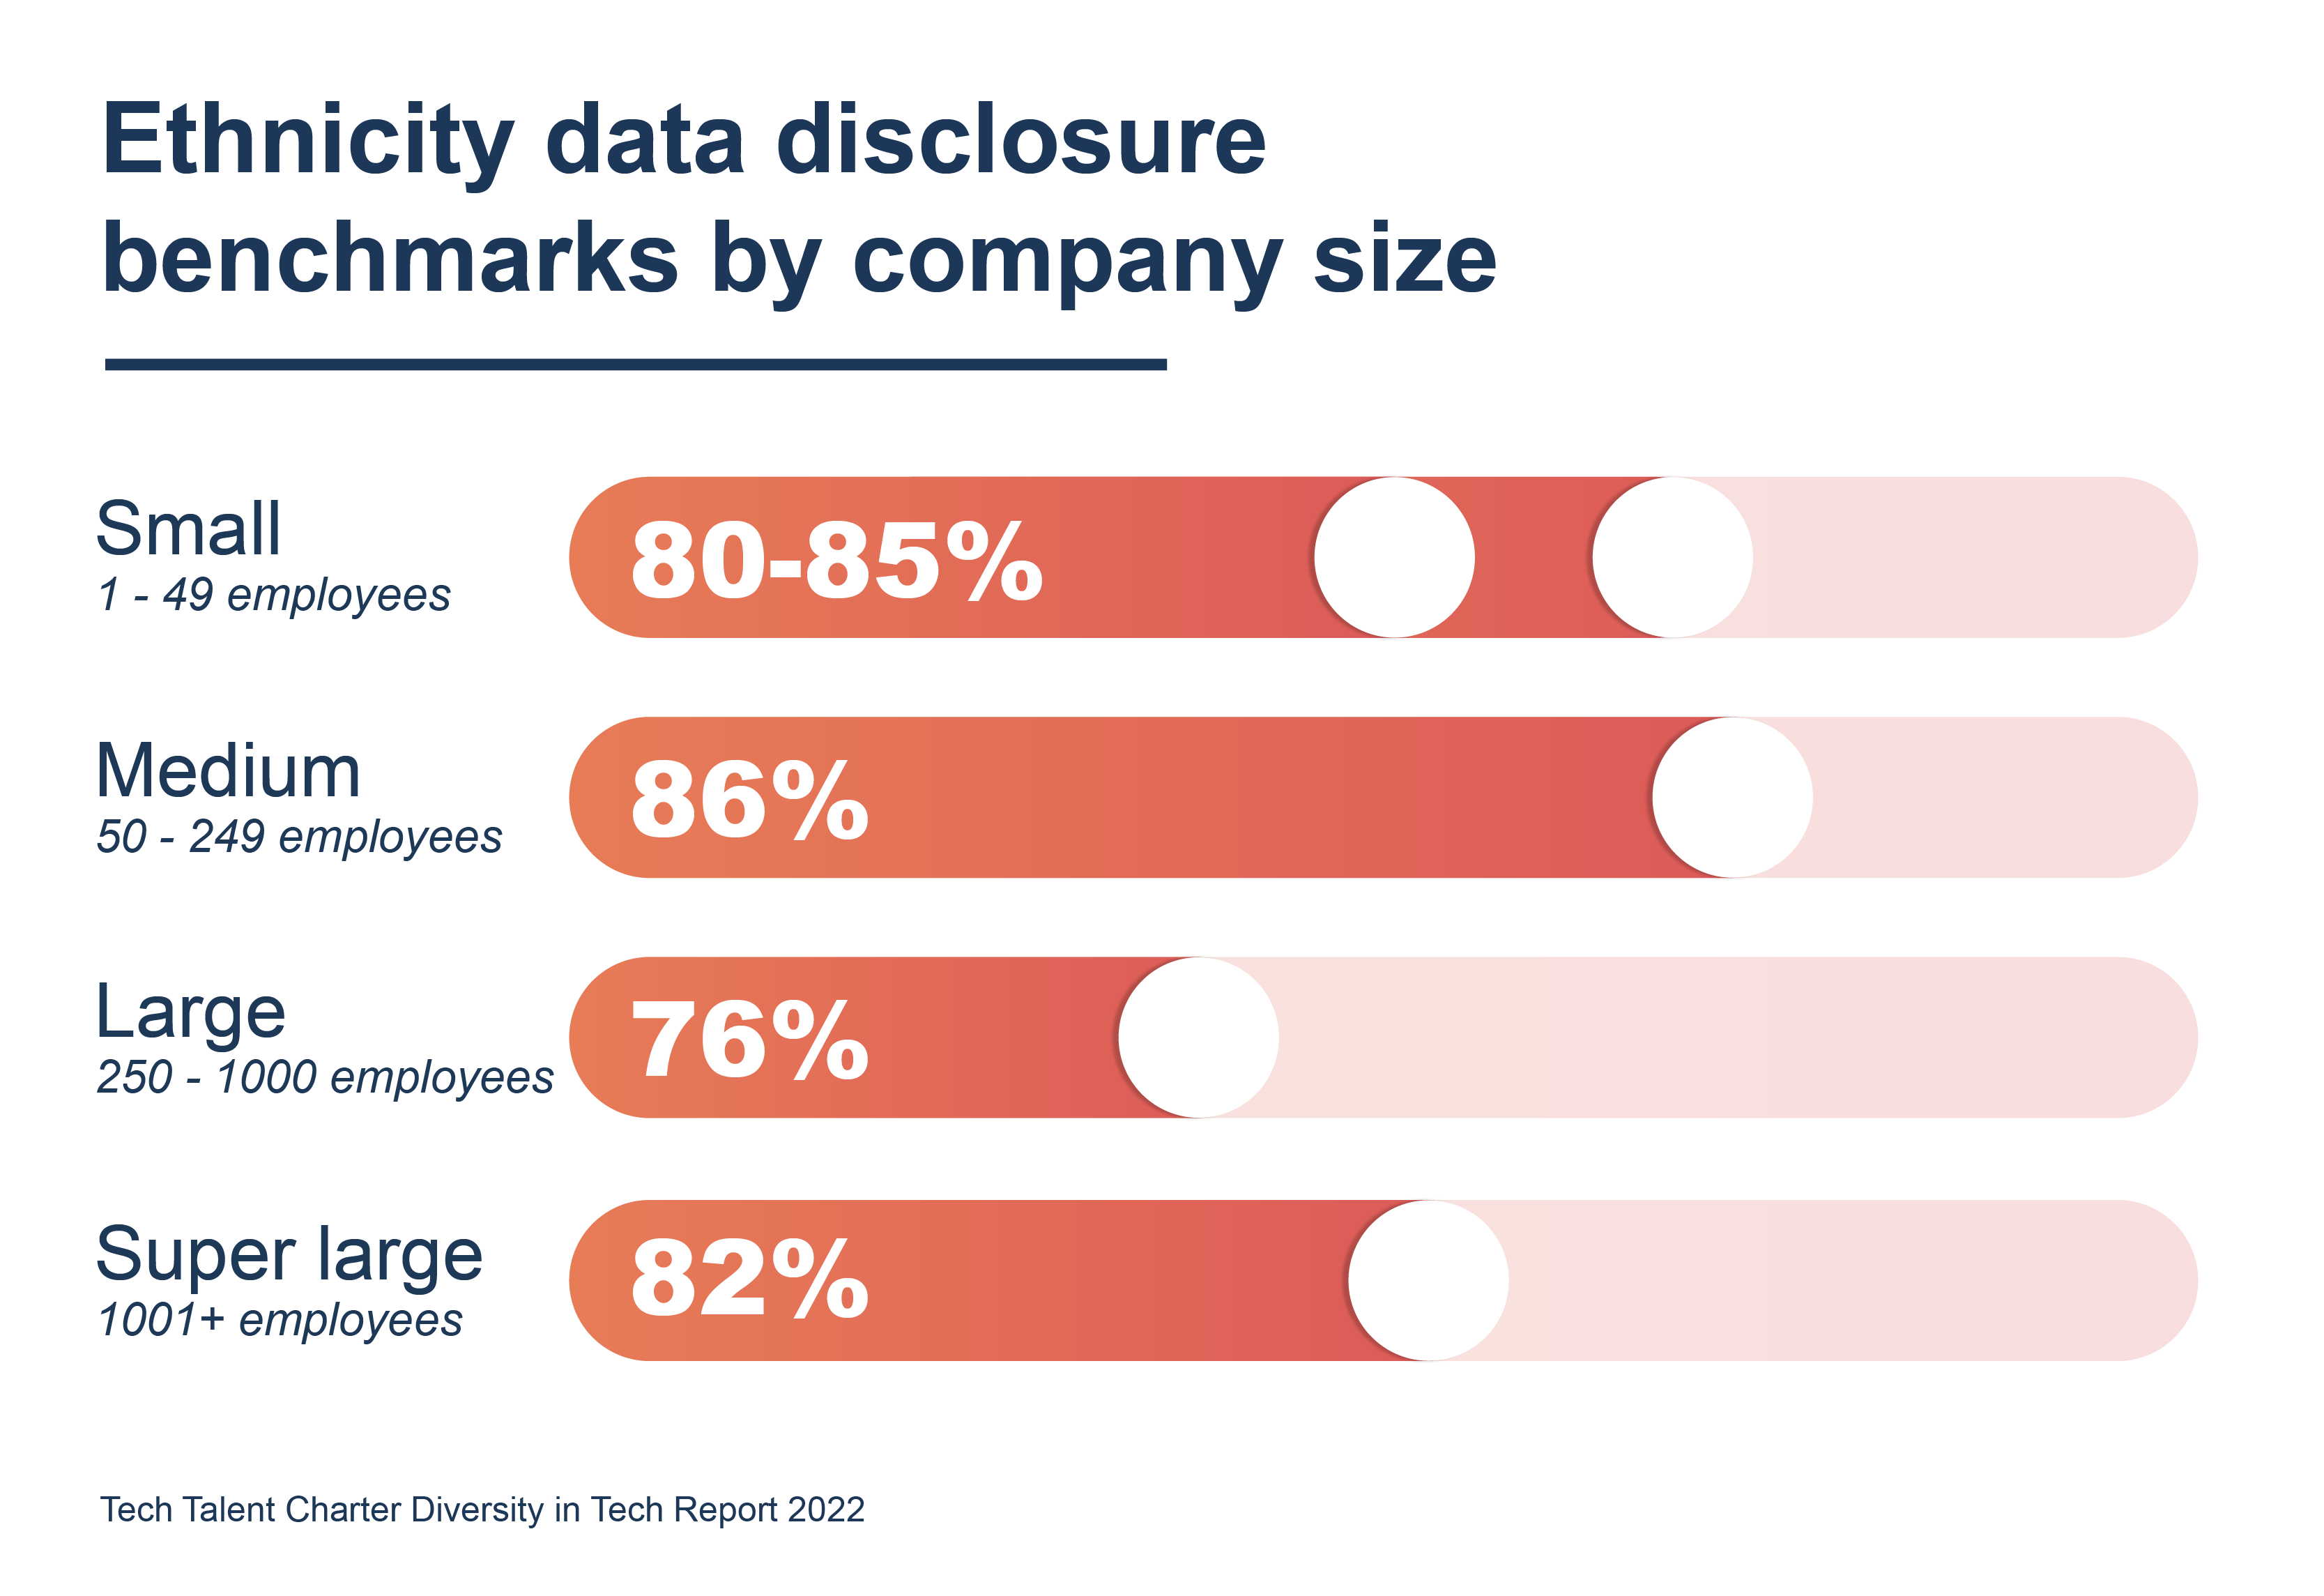 Ethnicity data disclosure benchmarks by company size